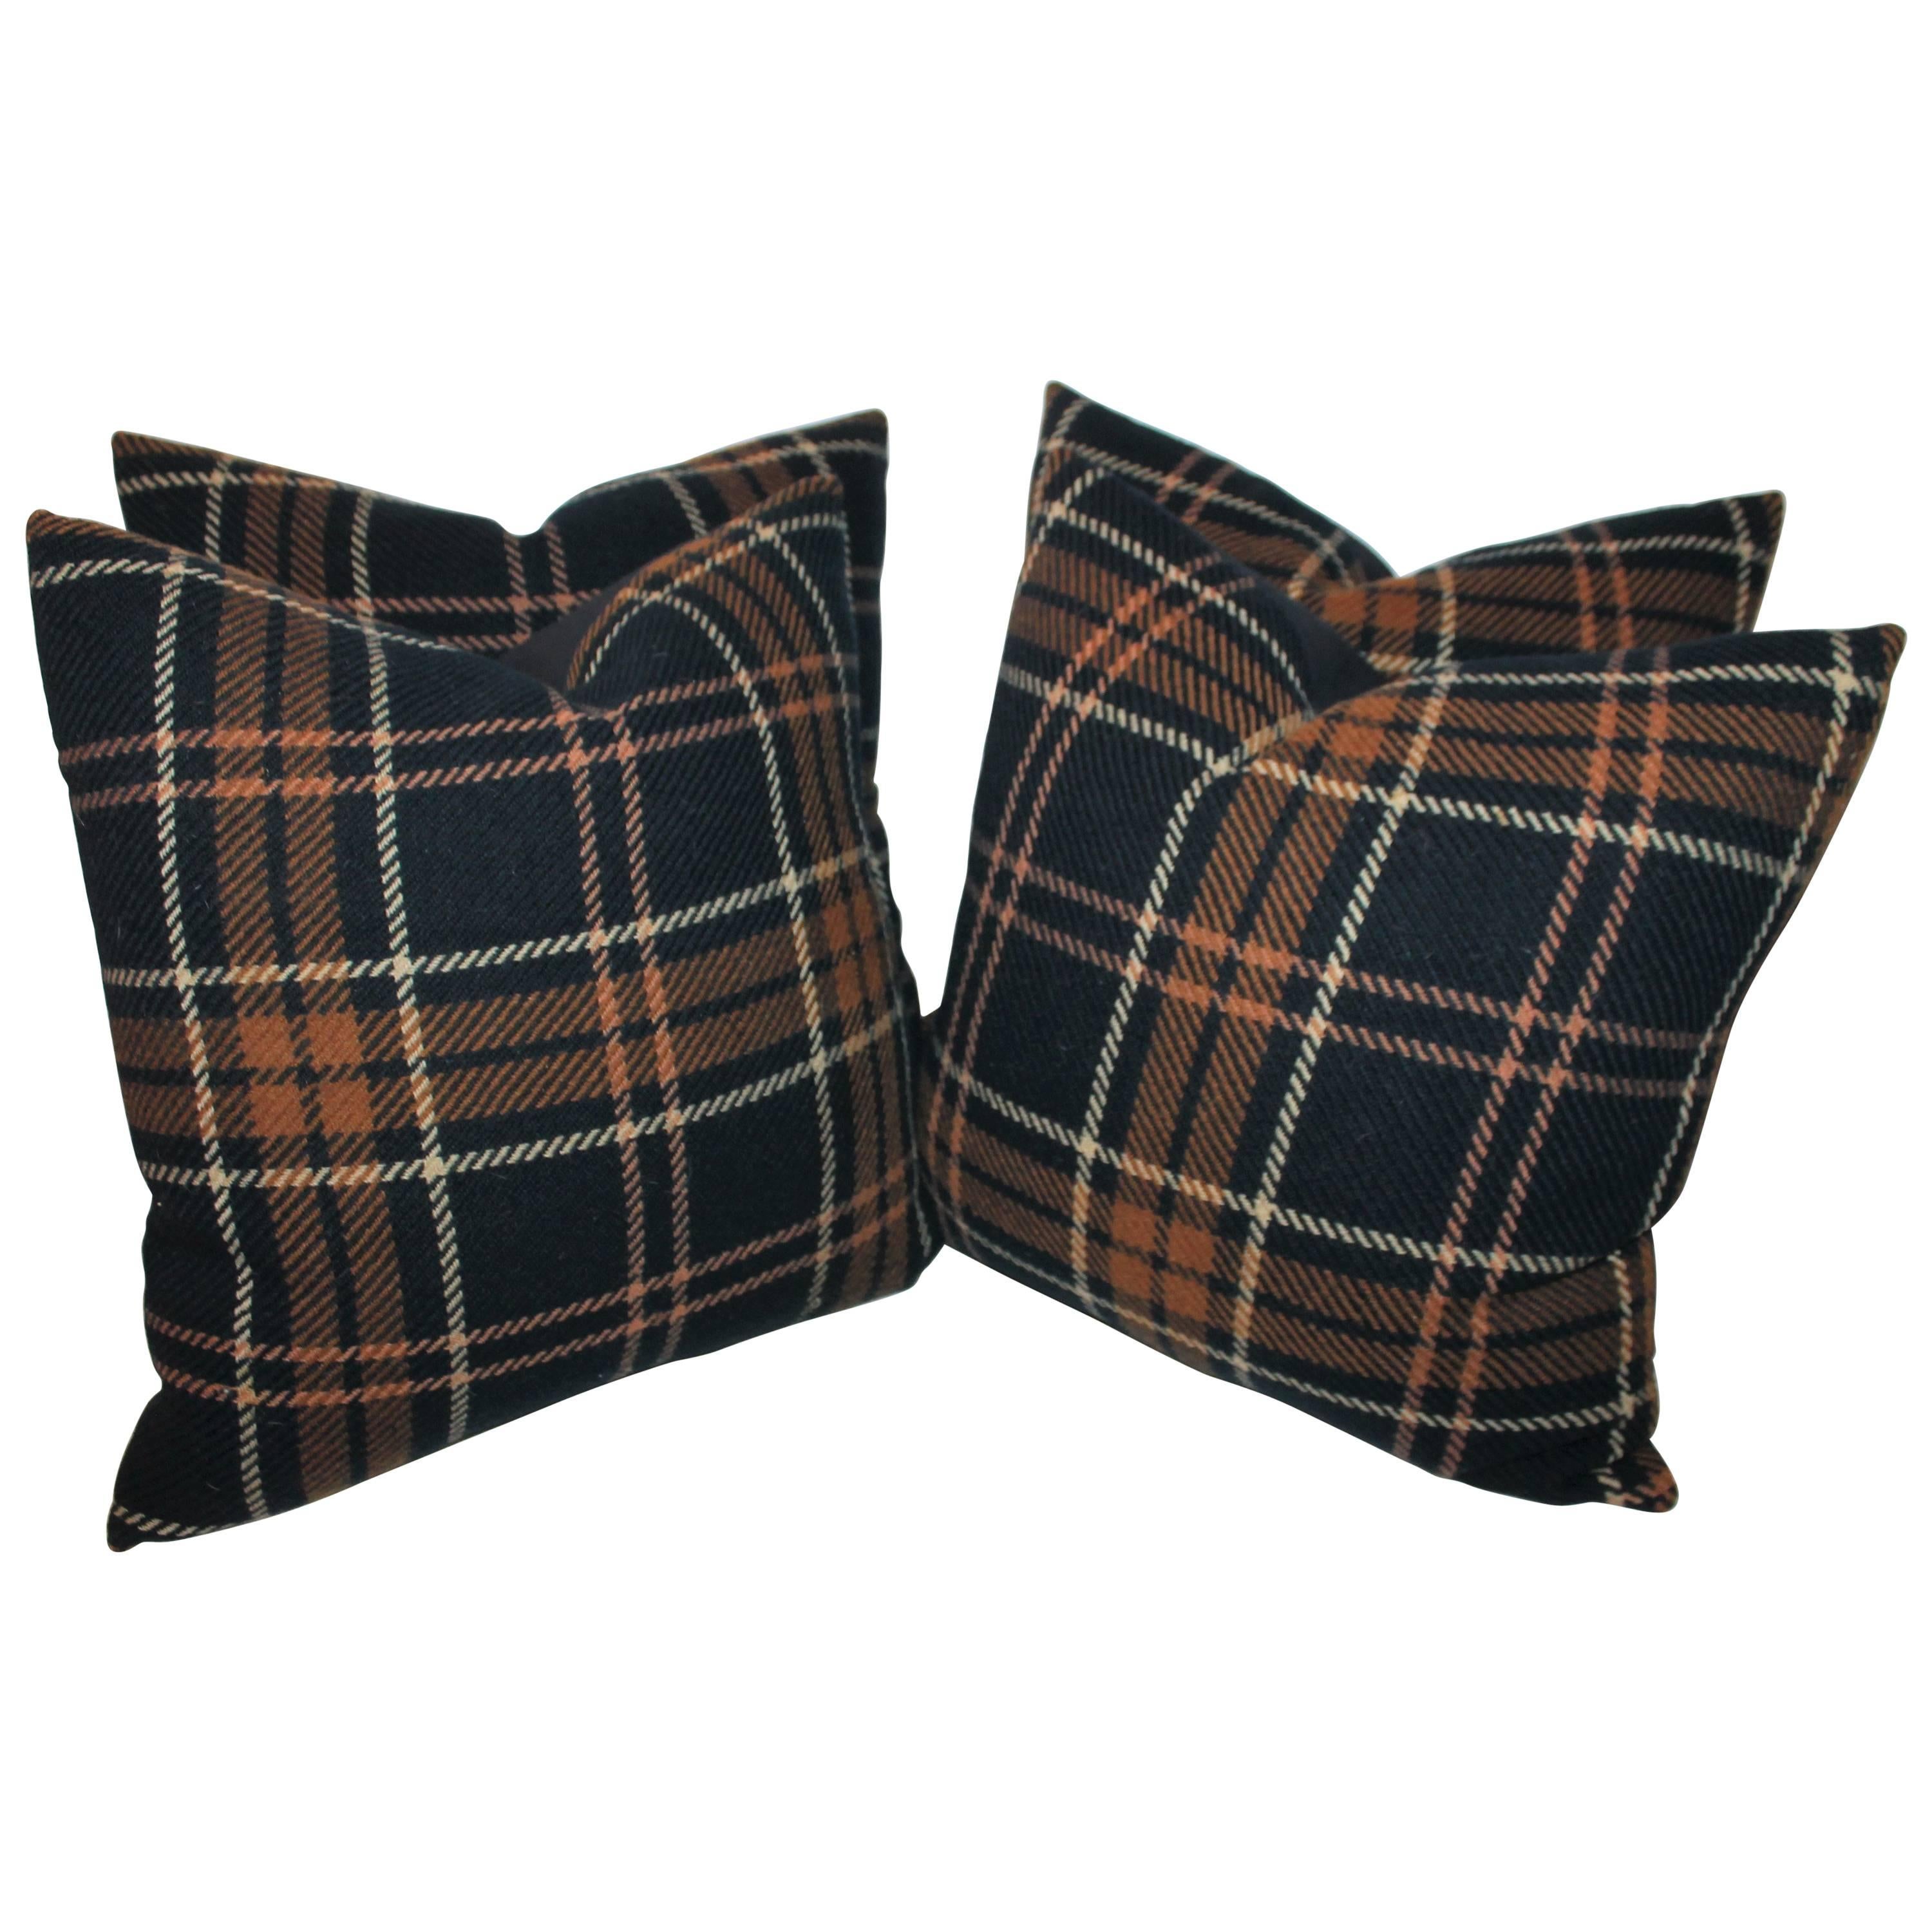 Pair of Two Amazing Wool Plaid Blanket Pillows